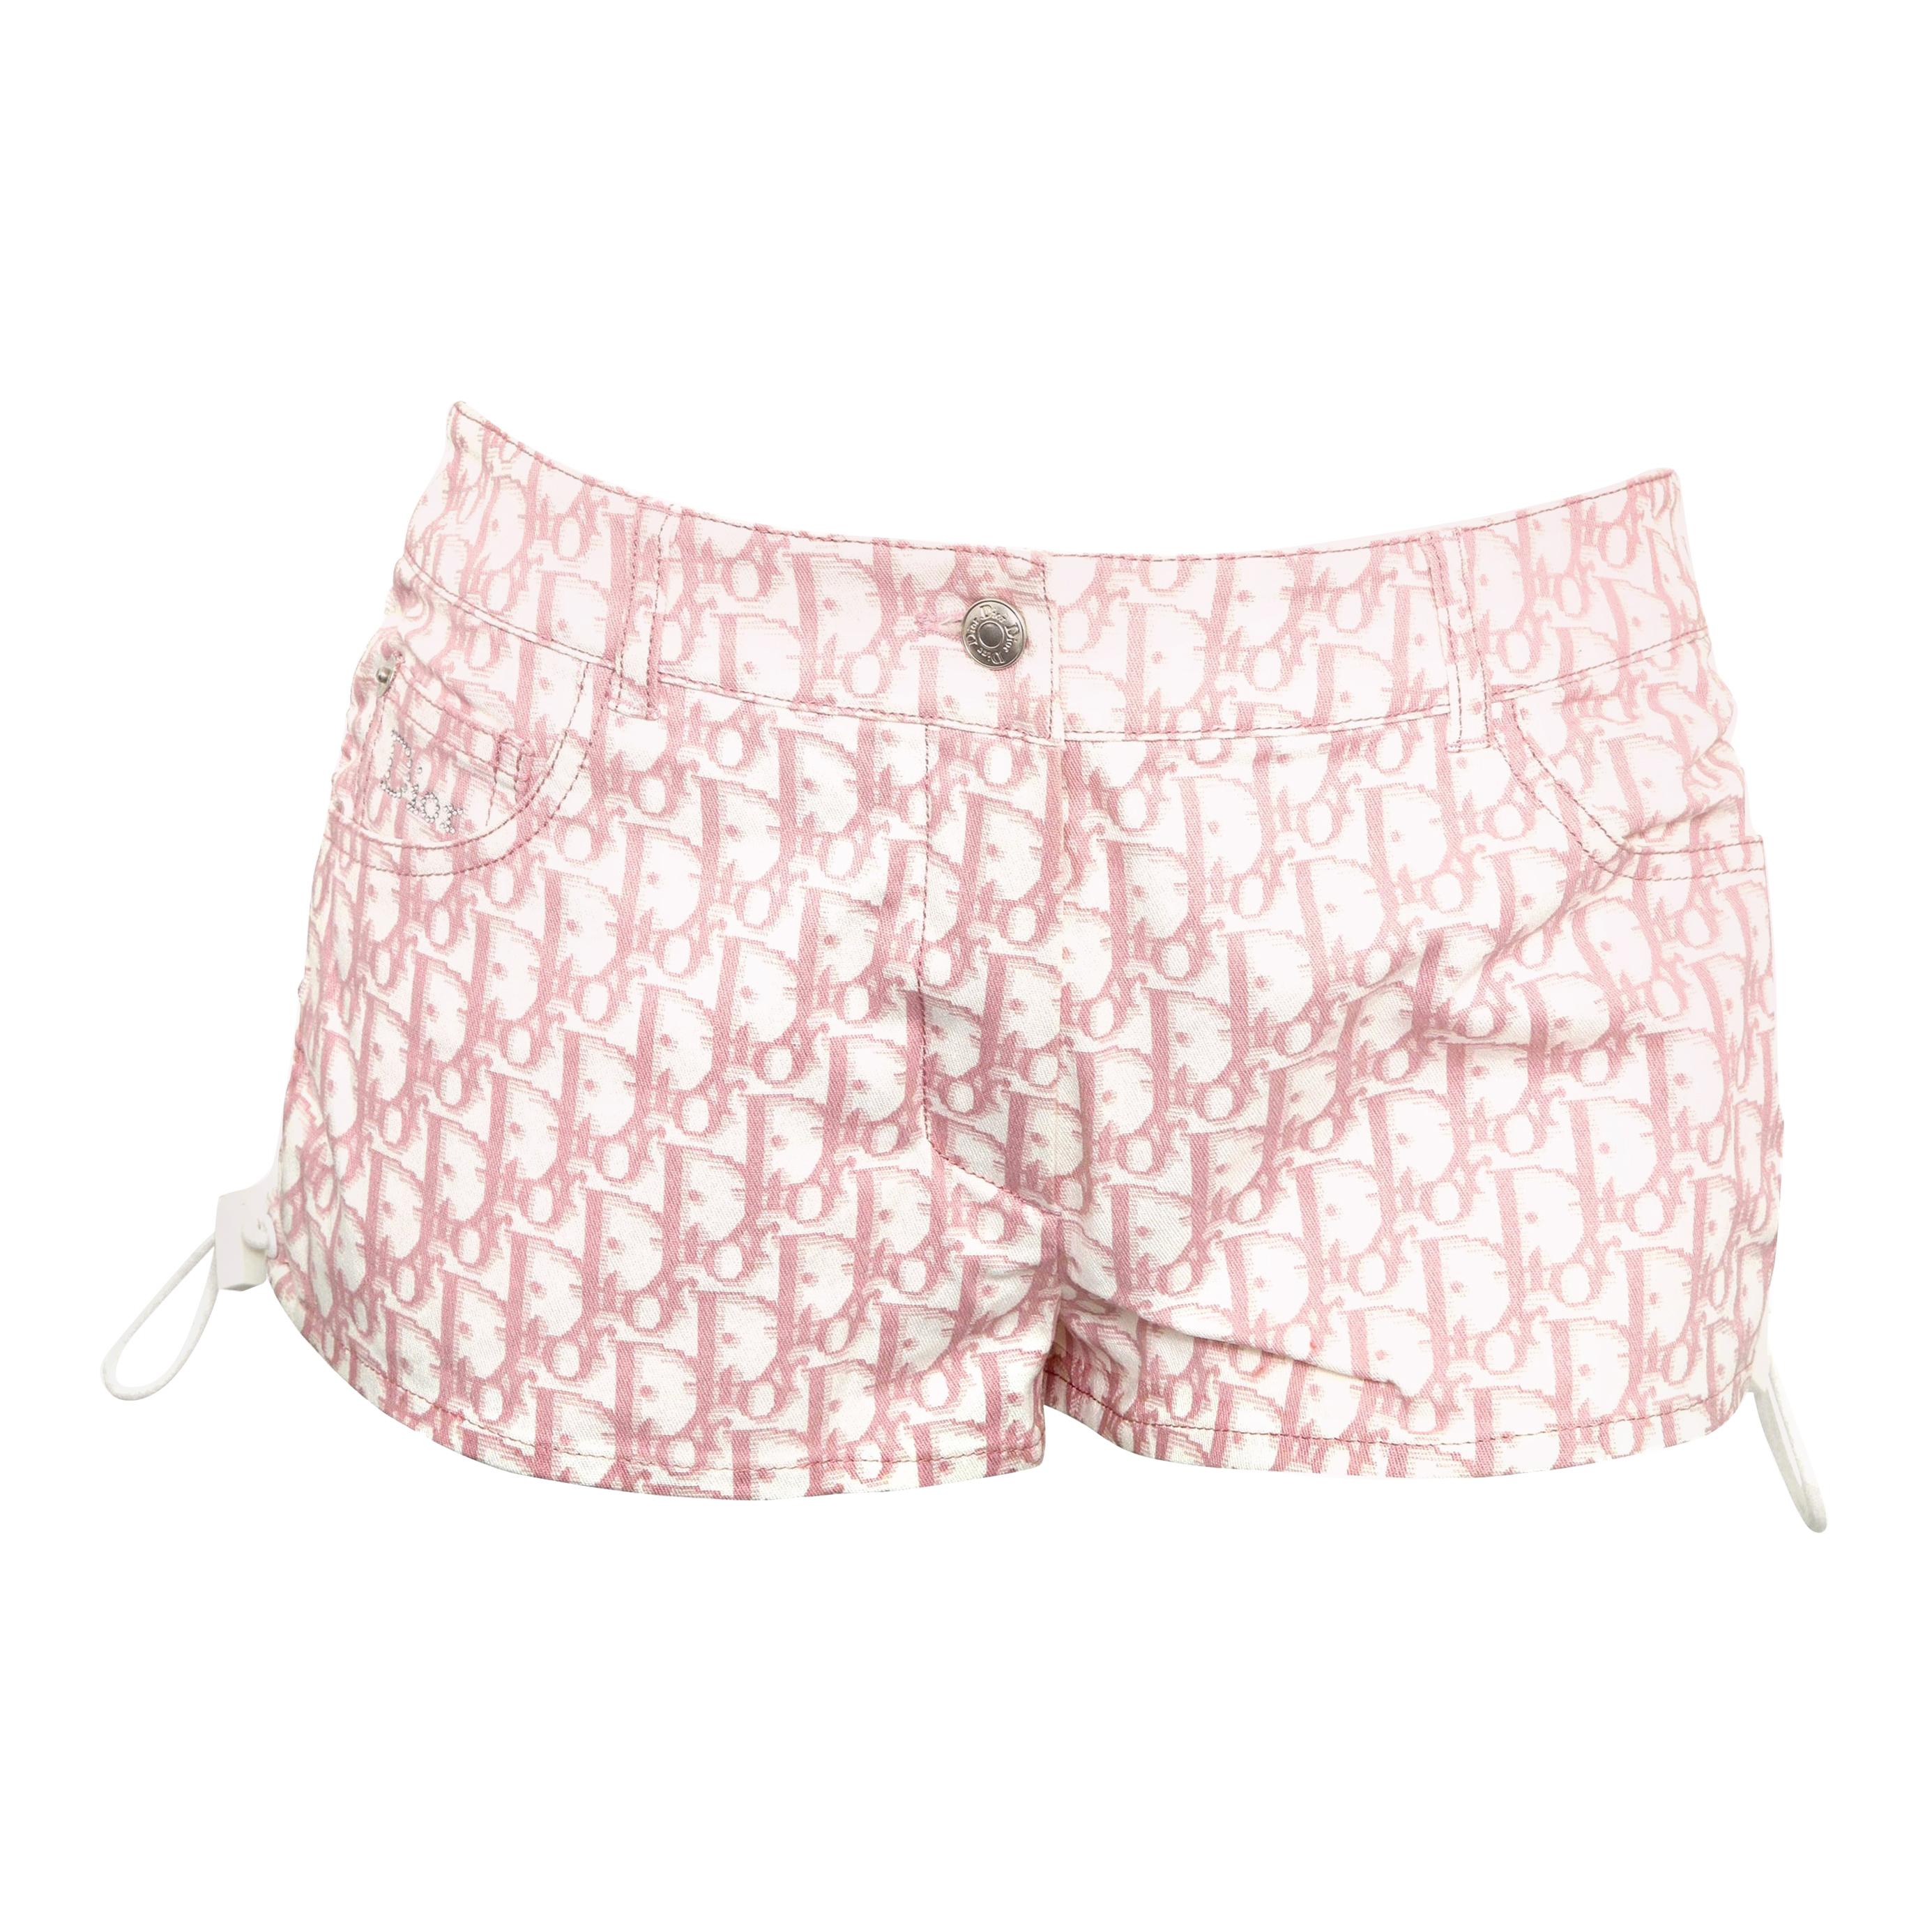 John Galliano for Christian Dior Pink Trotter Logo shorts For Sale